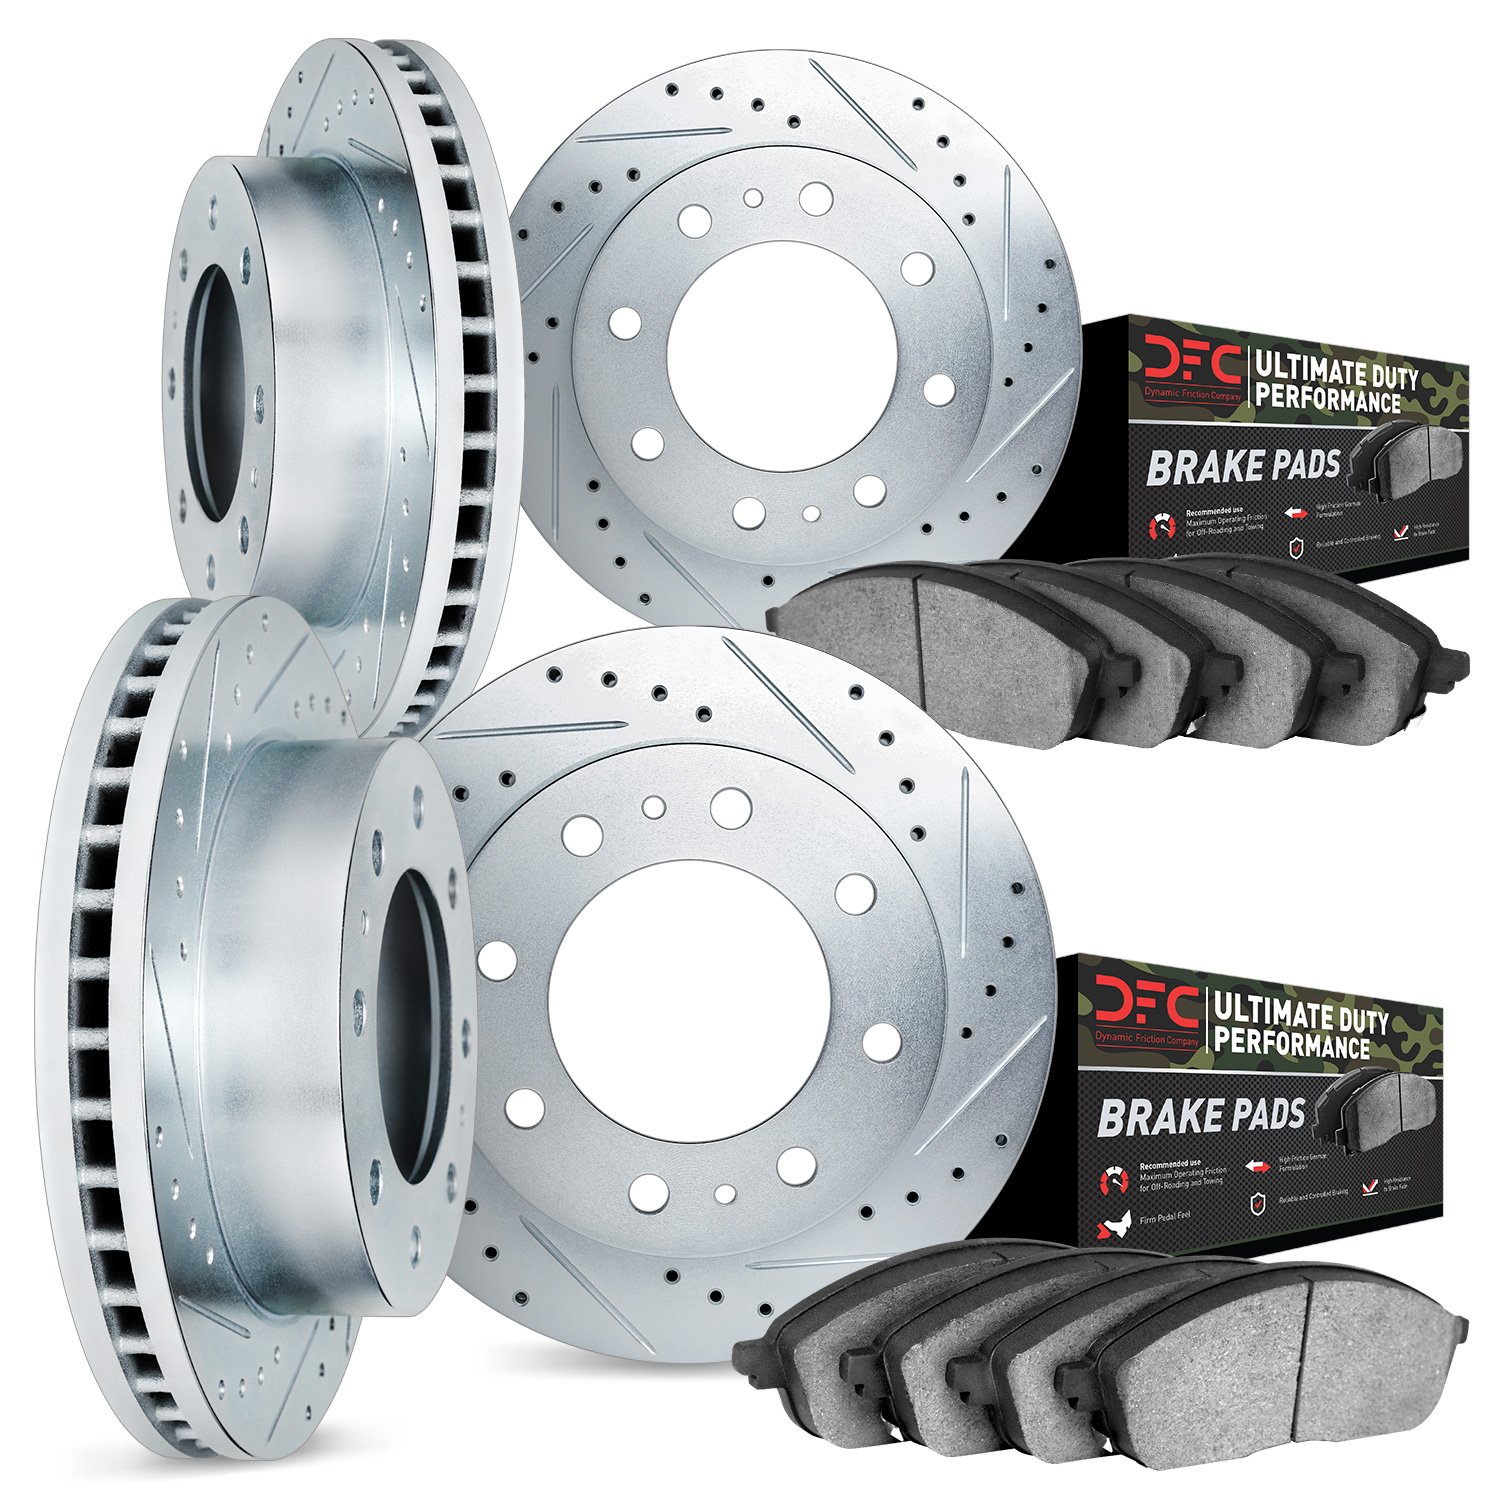 7404-40001 Drilled/Slotted Brake Rotors with Ultimate-Duty Brake Pads Kit [Silver], 2000-2002 Mopar, Position: Front and Rear